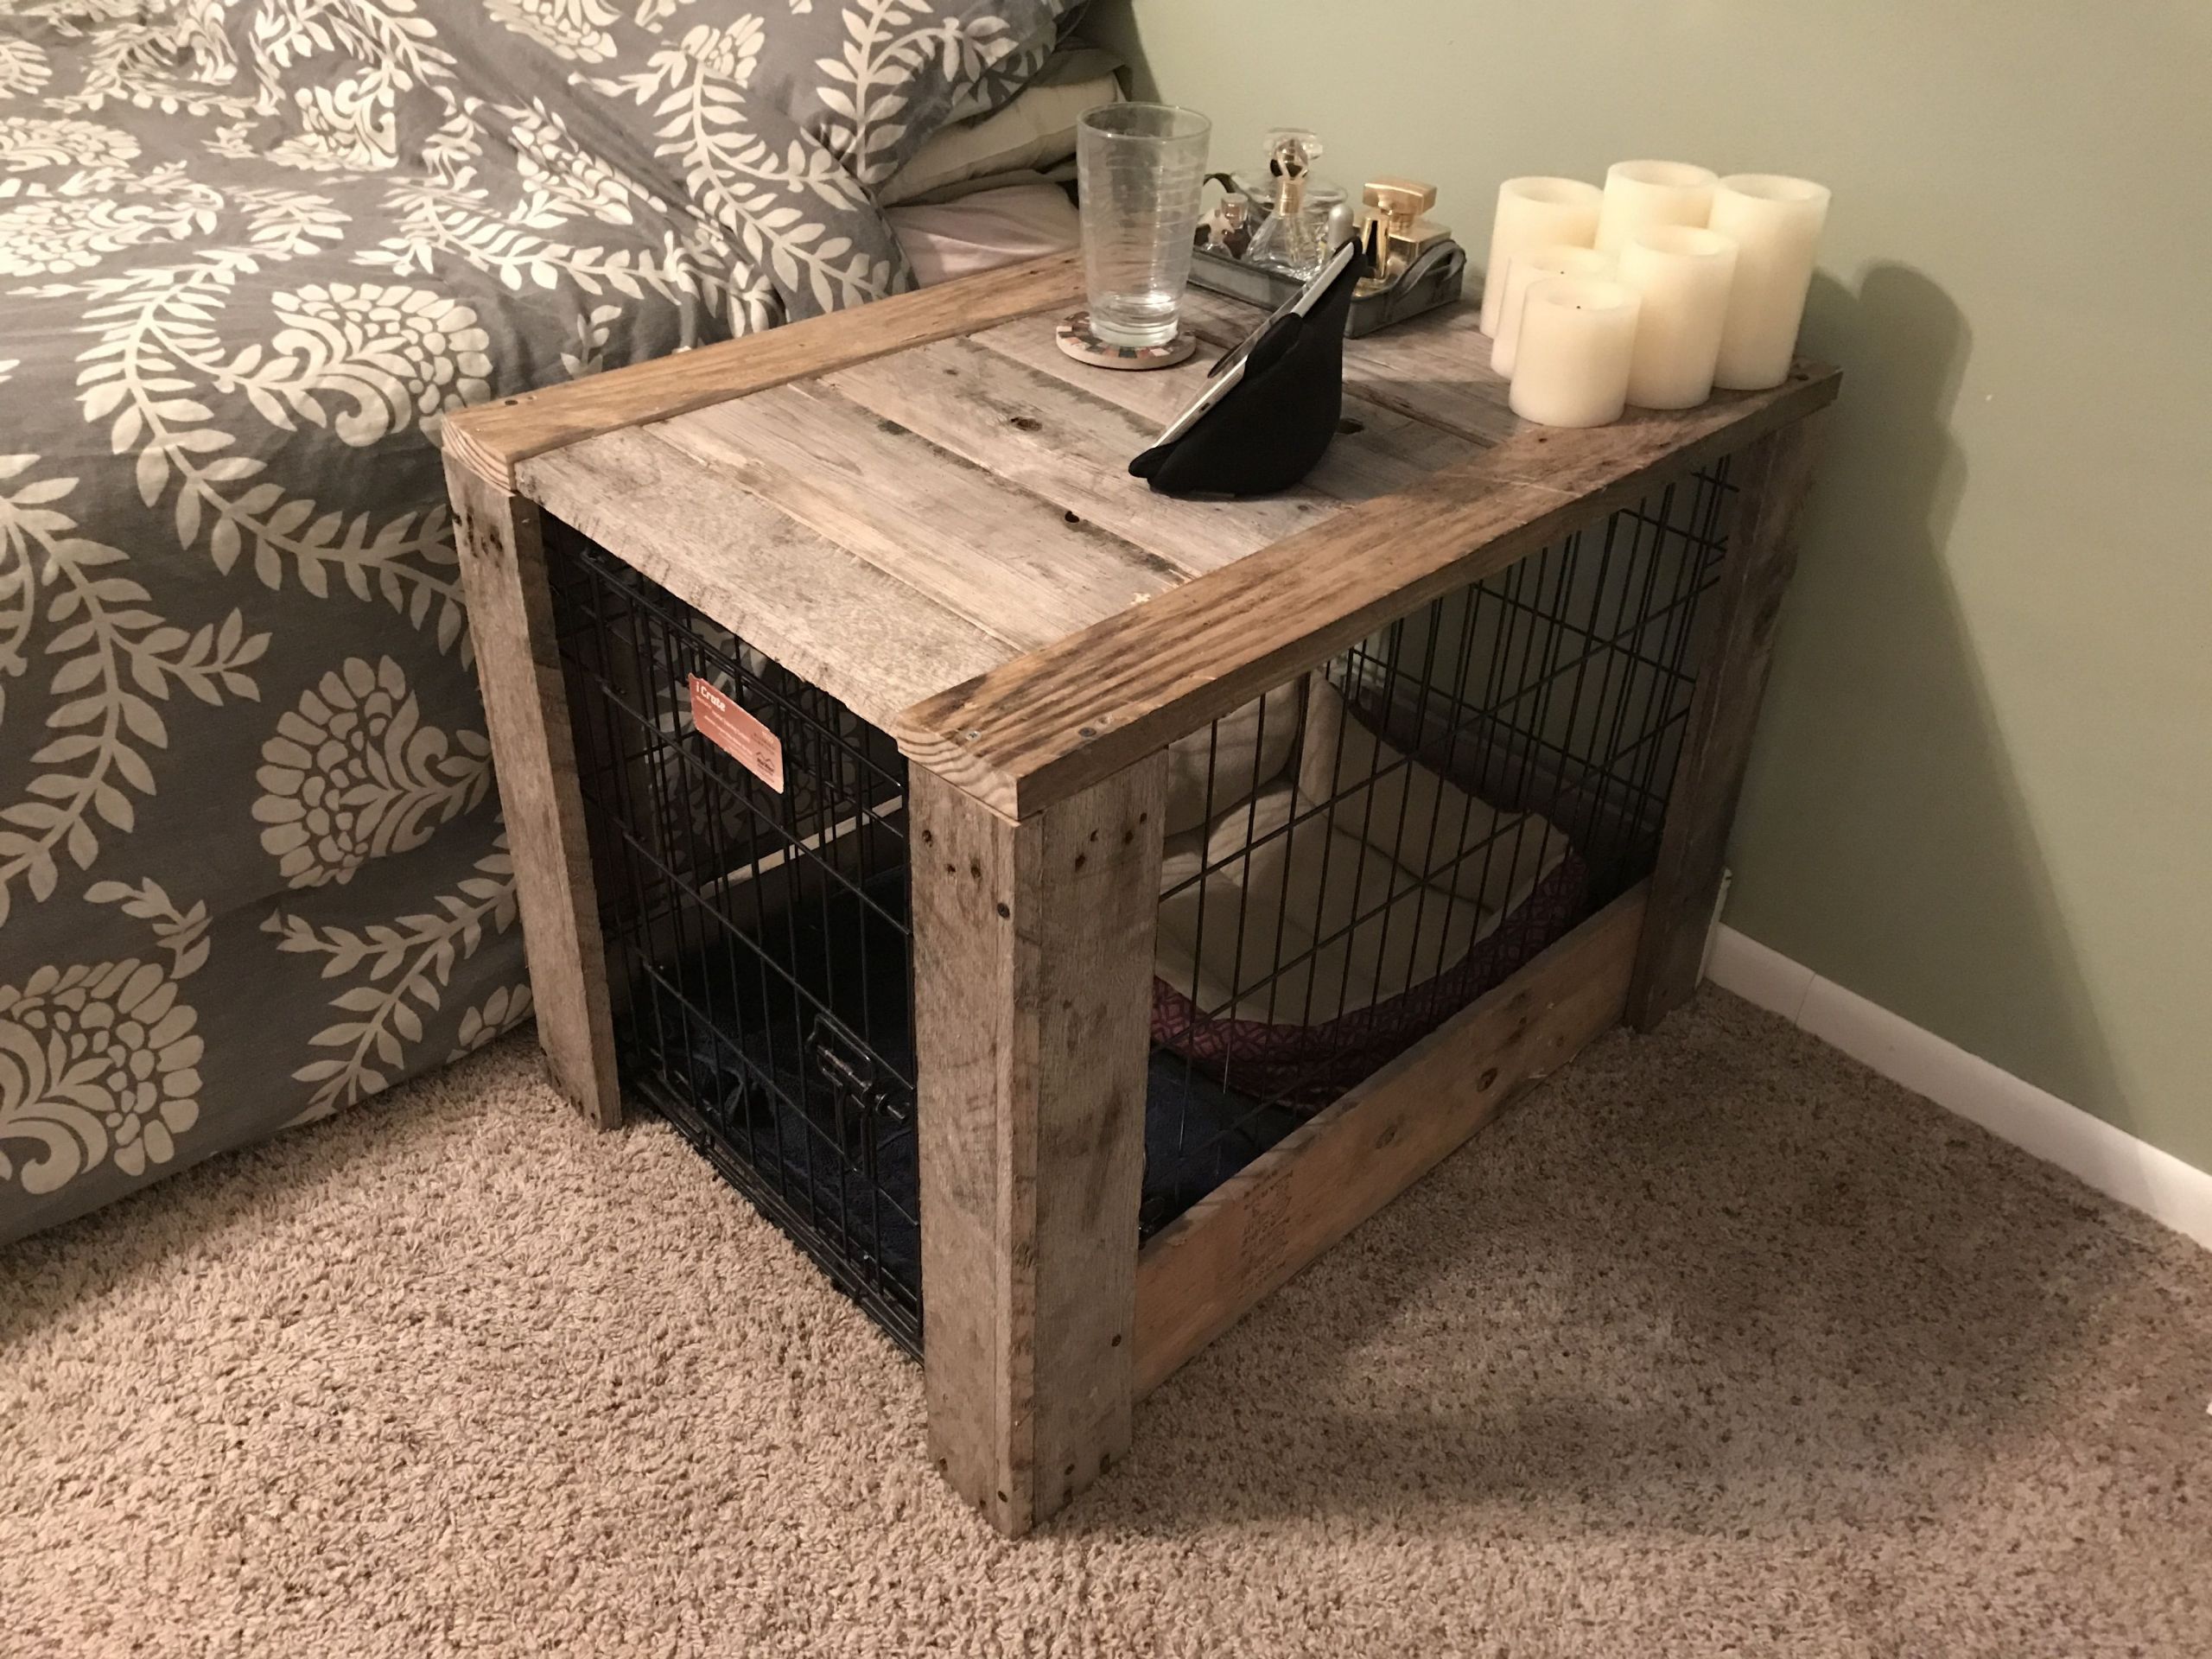 DIY Dog Cage Table
 Pallet wood dog crate nightstand